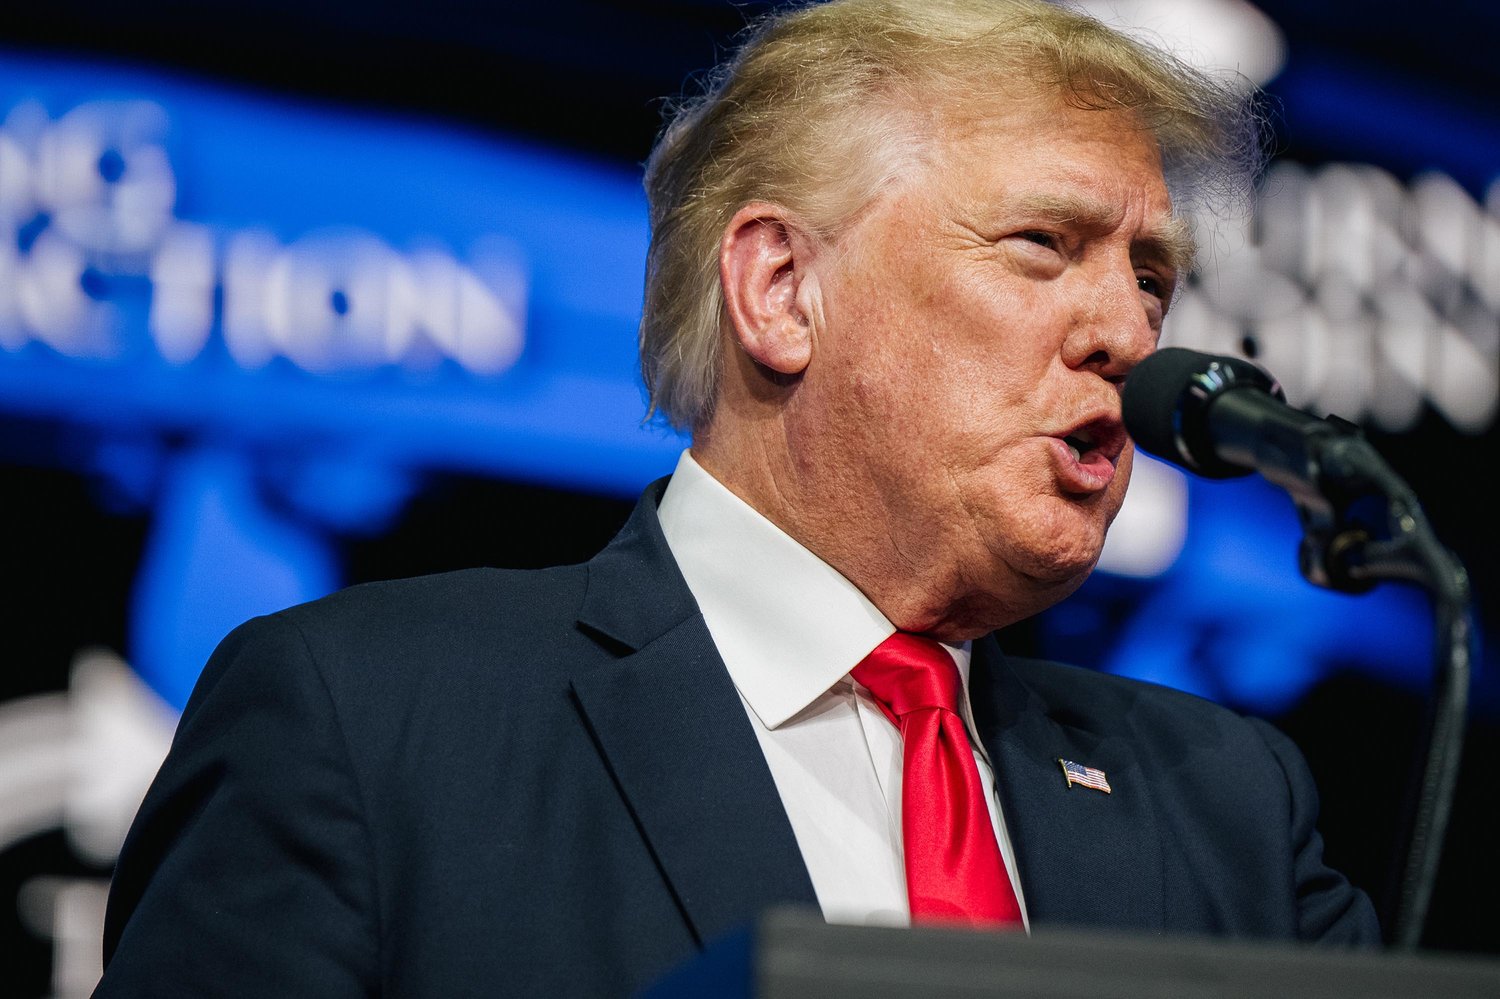 Former President Donald Trump speaks during the Rally To Protect Our Elections conference on July 24, 2021, in Phoenix. (Brandon Bell/Getty Images/TNS)